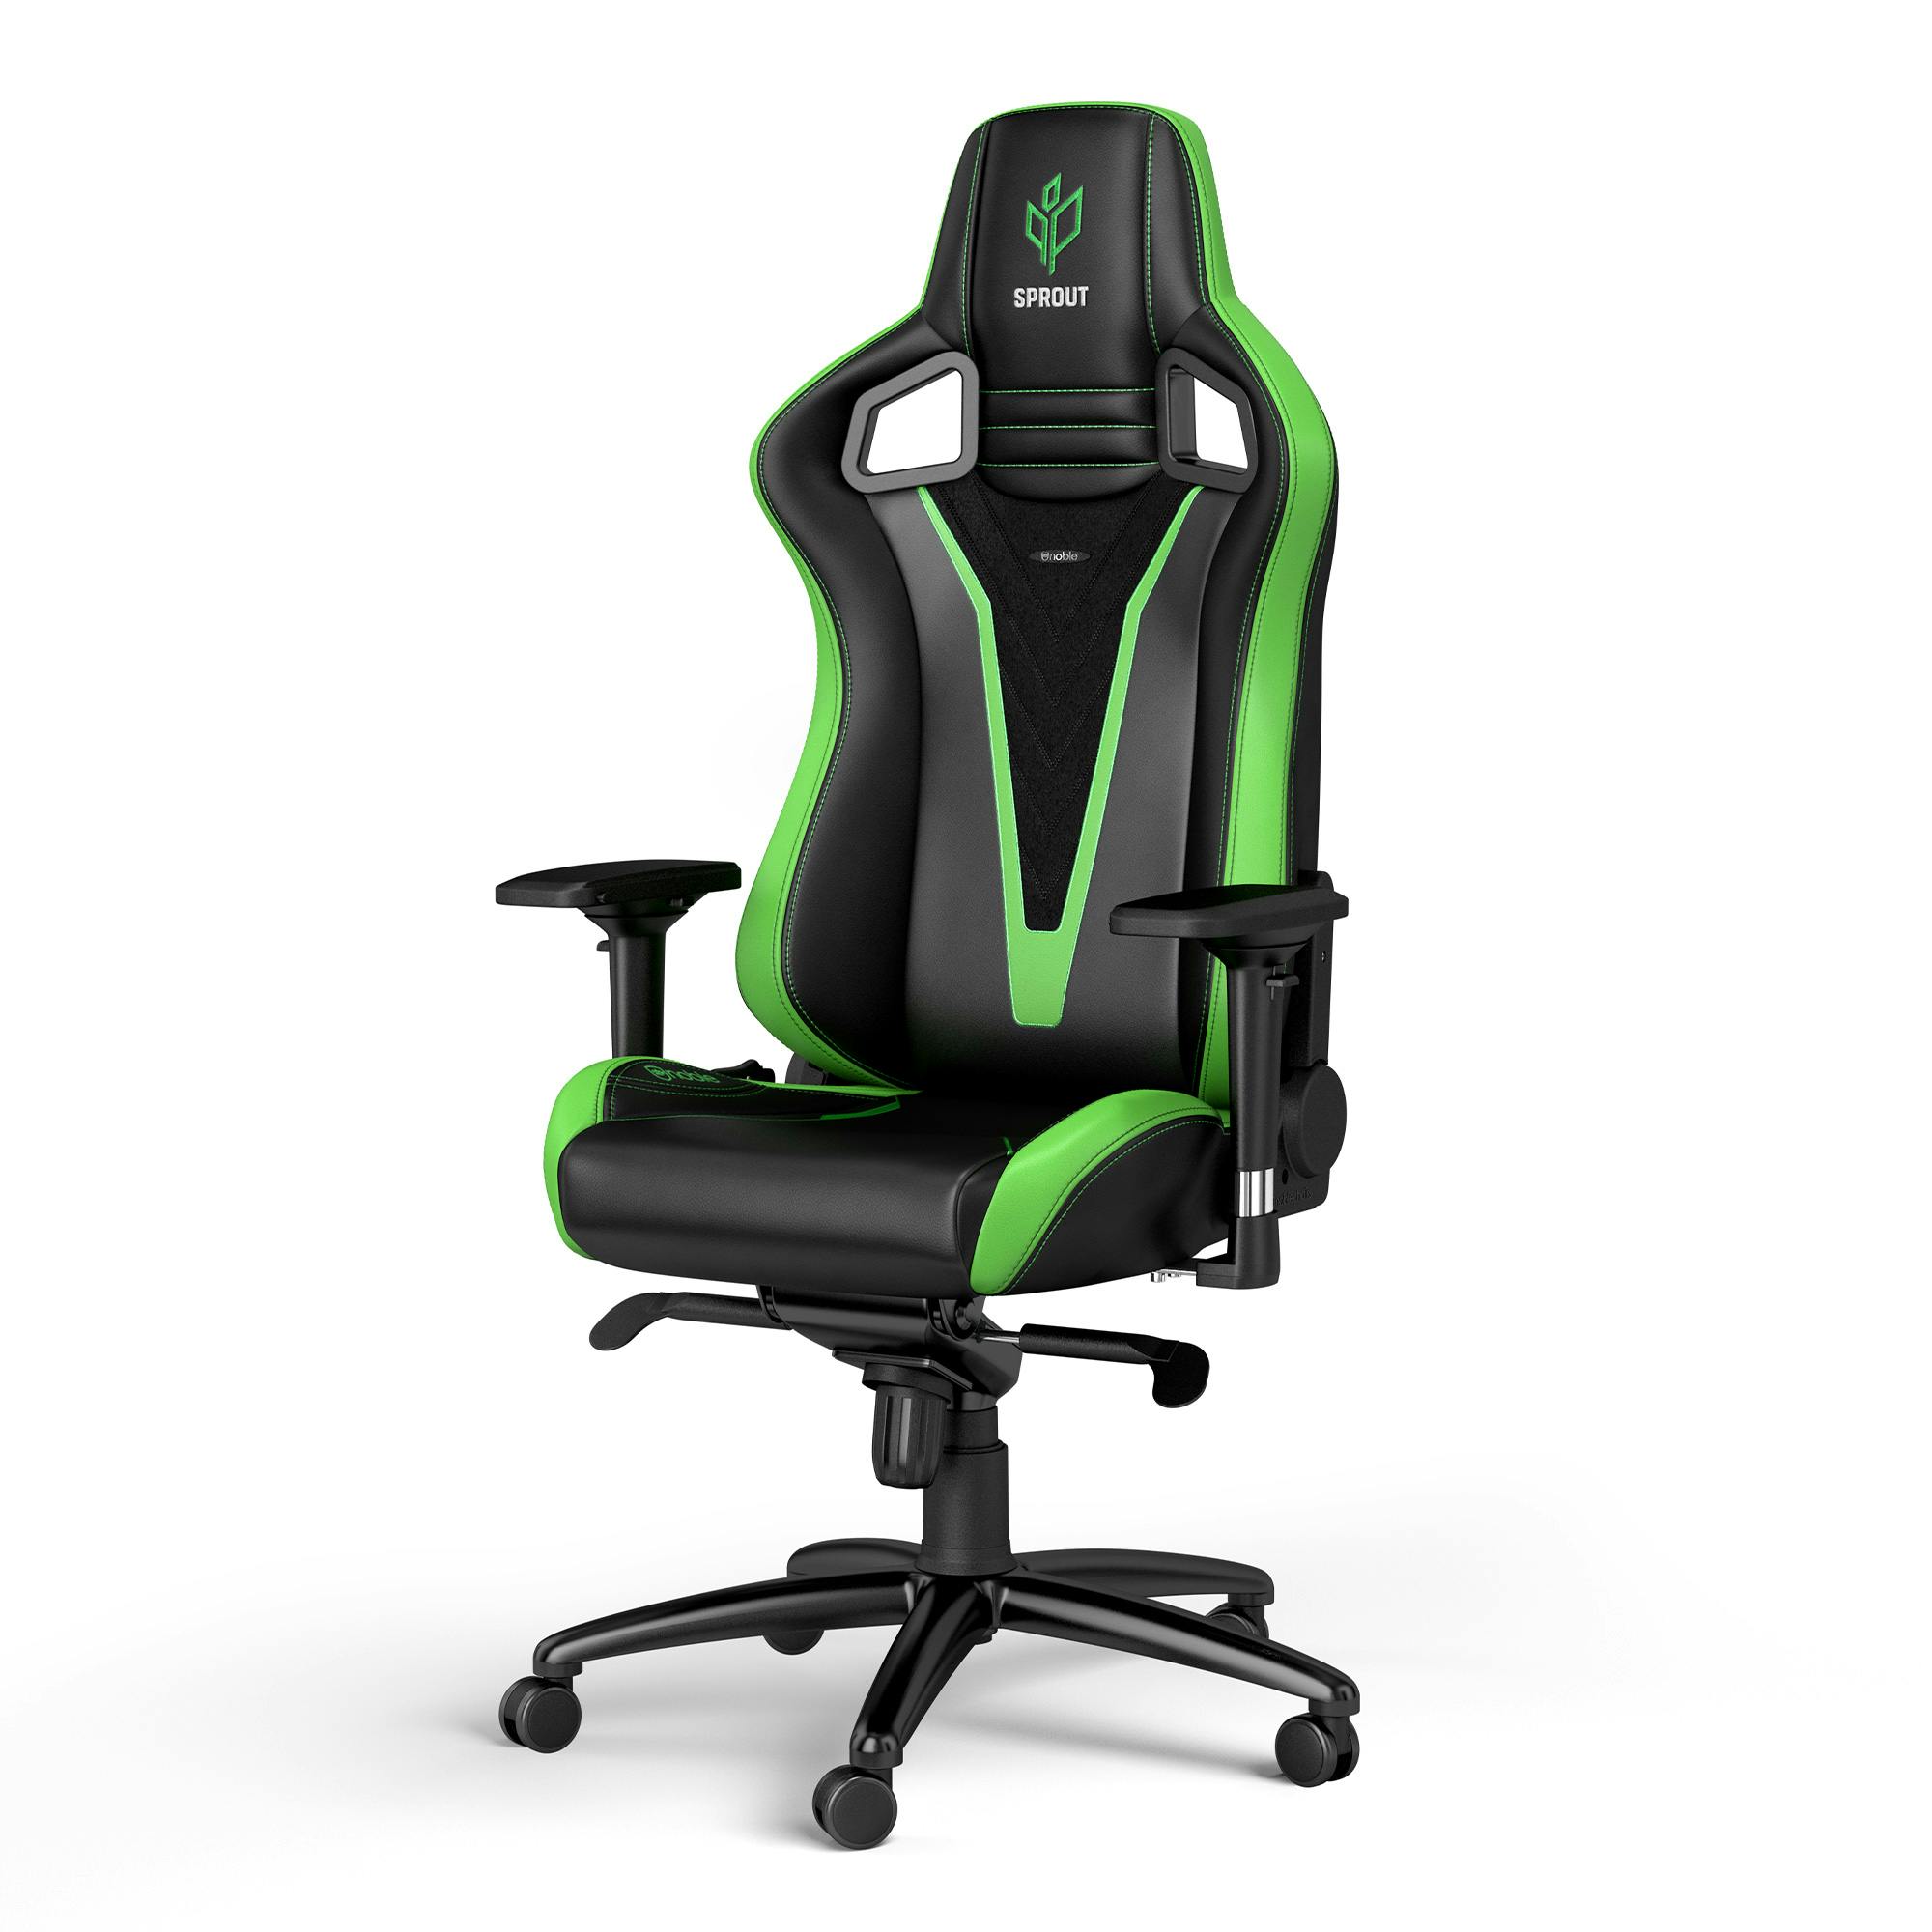 Noblechairs - EPIC Sprout Edition